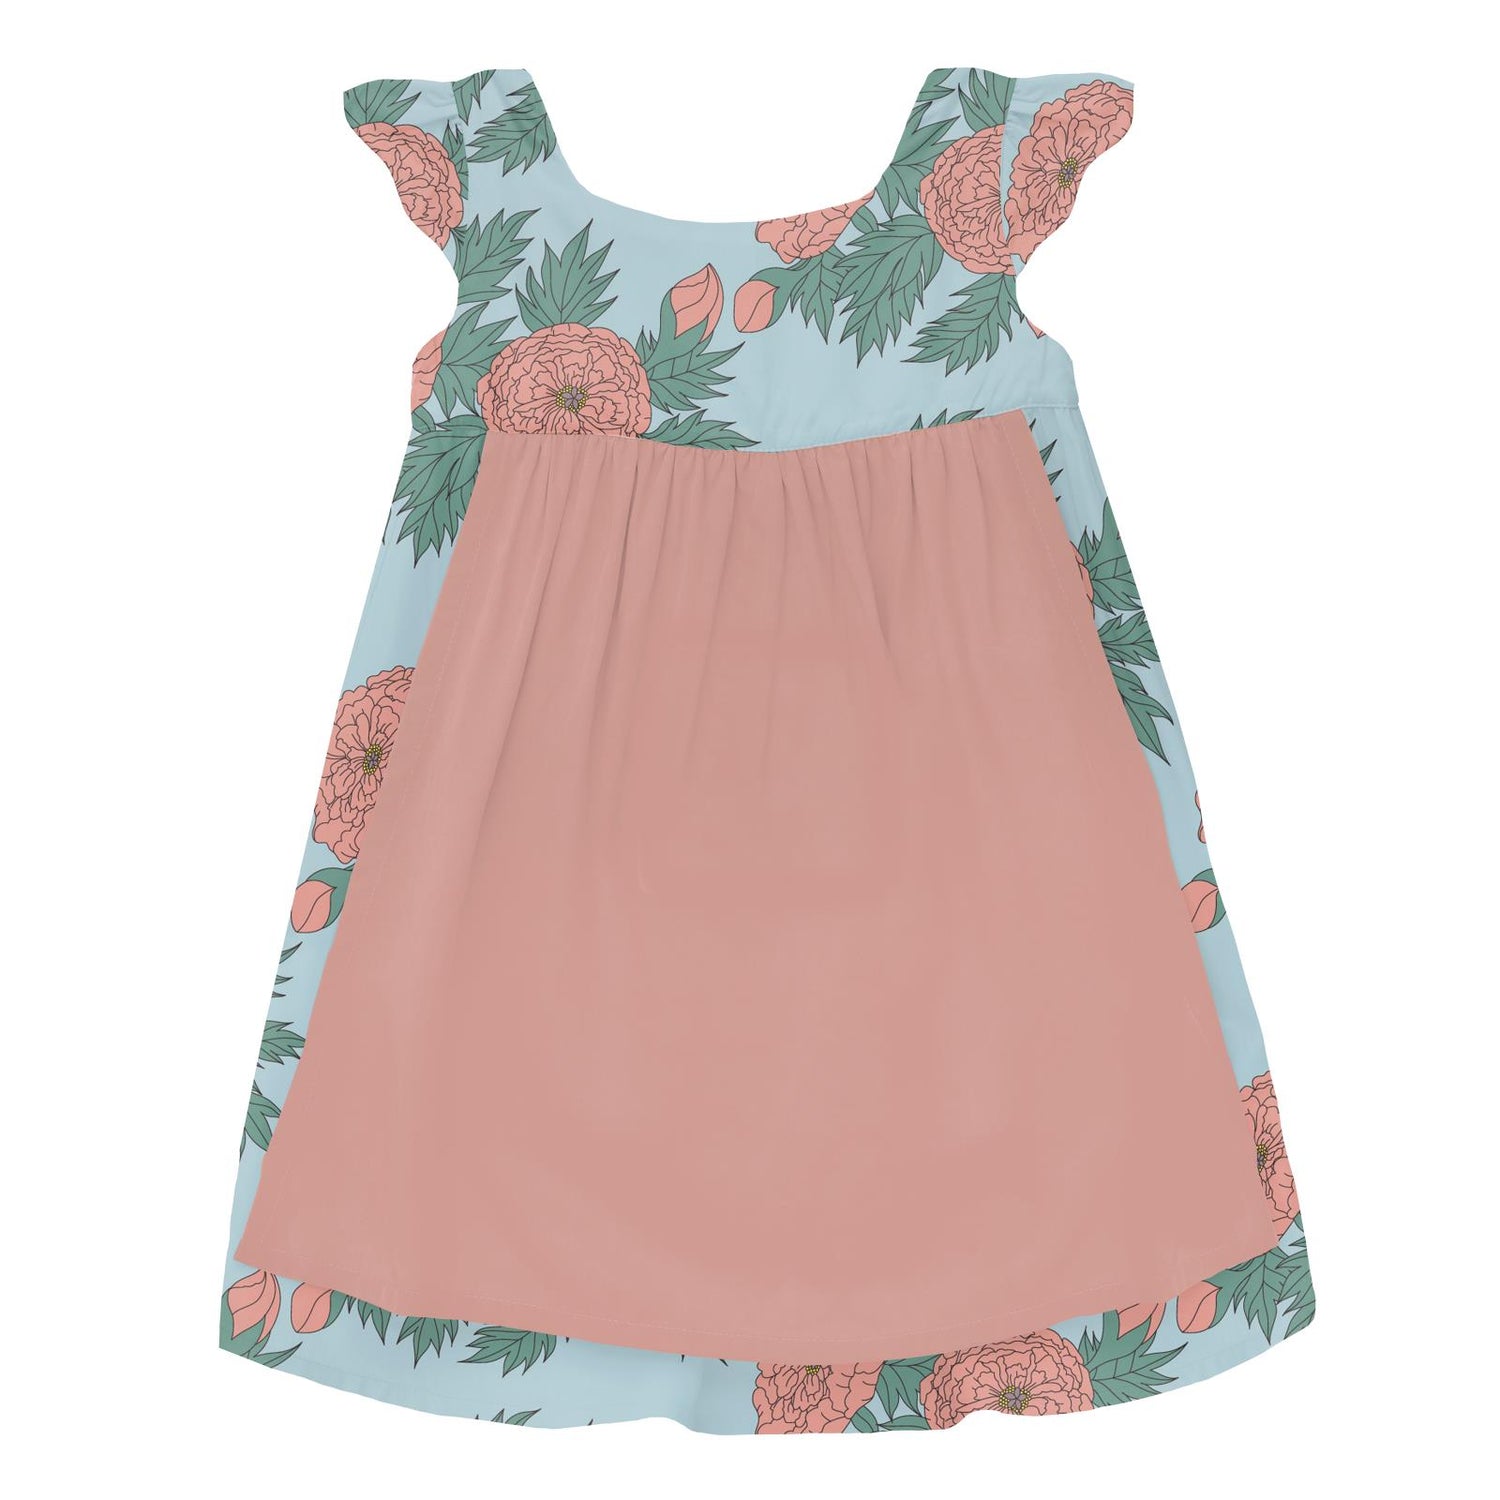 Woven Garden Dress with Apron in Spring Sky Floral